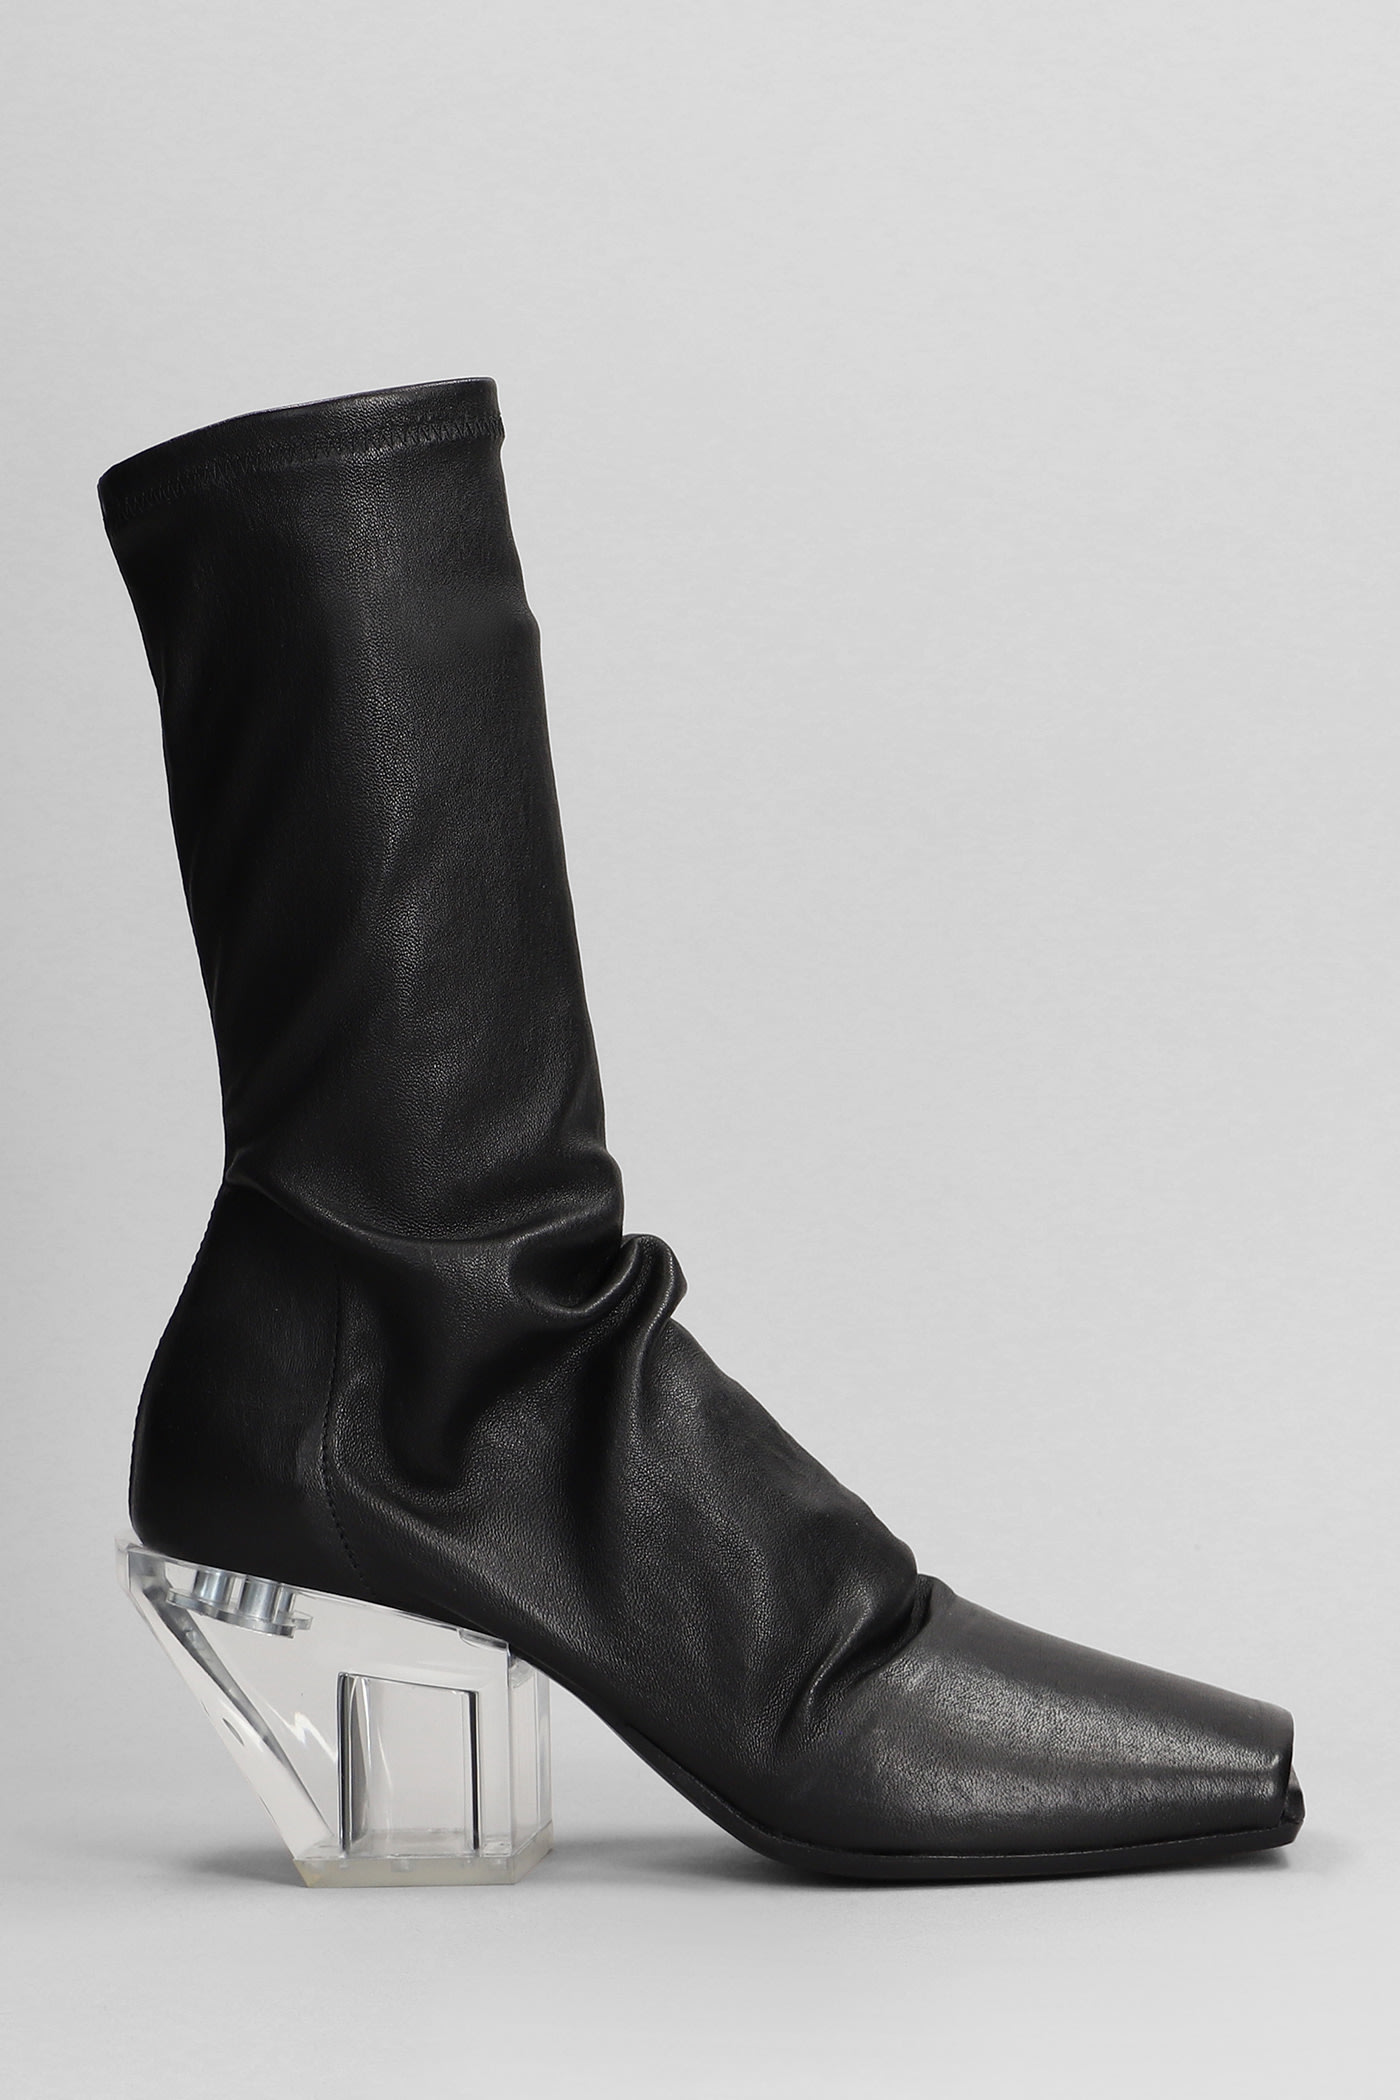 RICK OWENS STRETCH SLIVER HIGH HEELS ANKLE BOOTS IN BLACK LEATHER